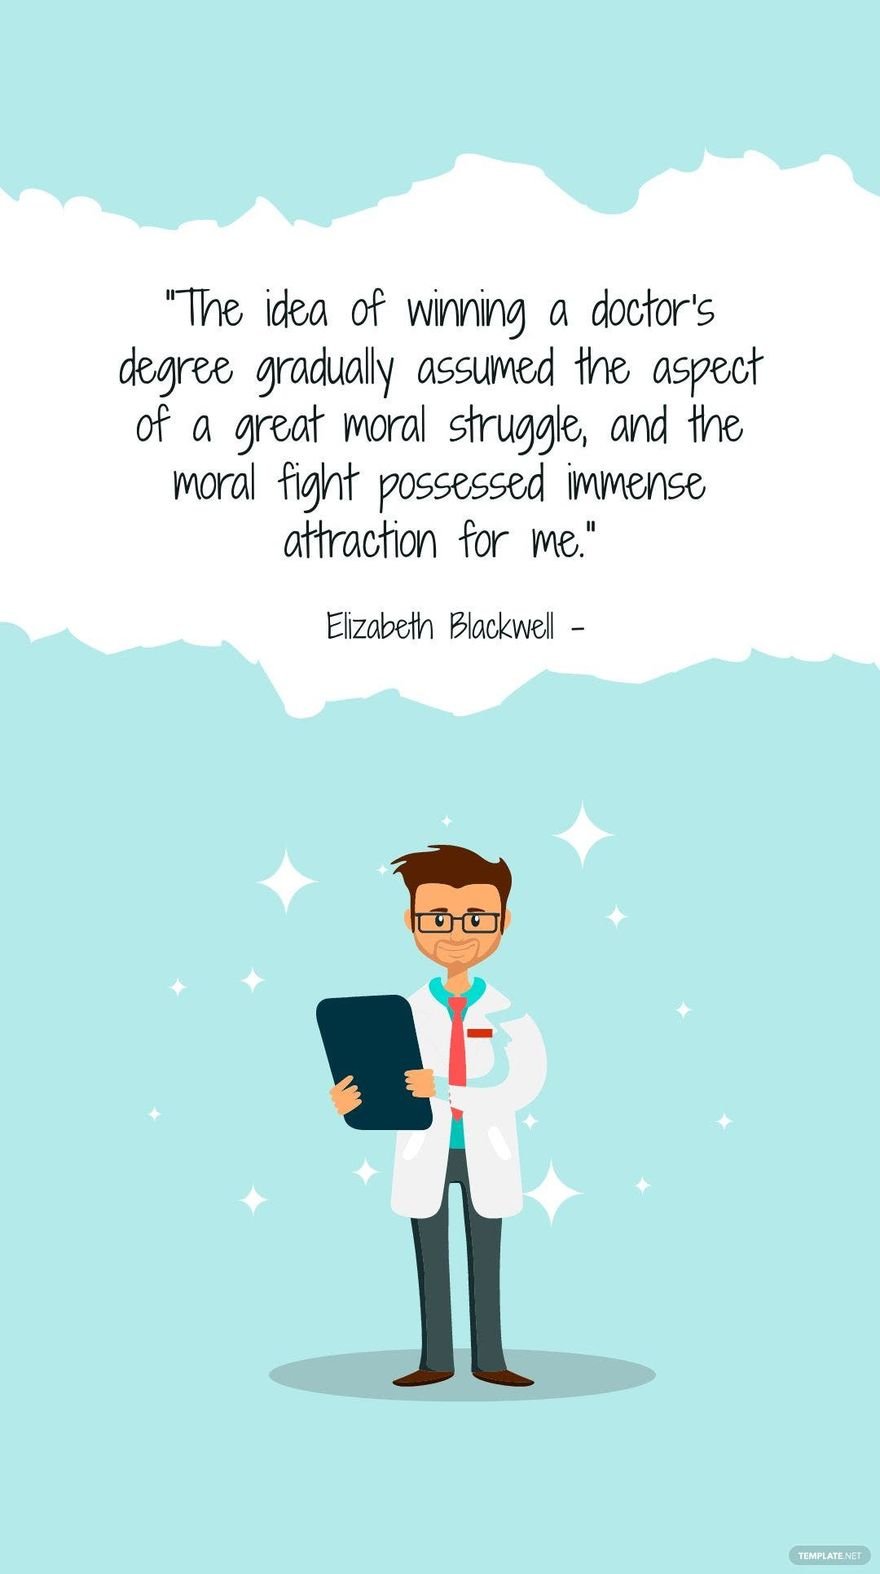 Elizabeth Blackwell - The idea of winning a doctor's degree gradually assumed the aspect of a great moral struggle, and the moral fight possessed immense attraction for me.